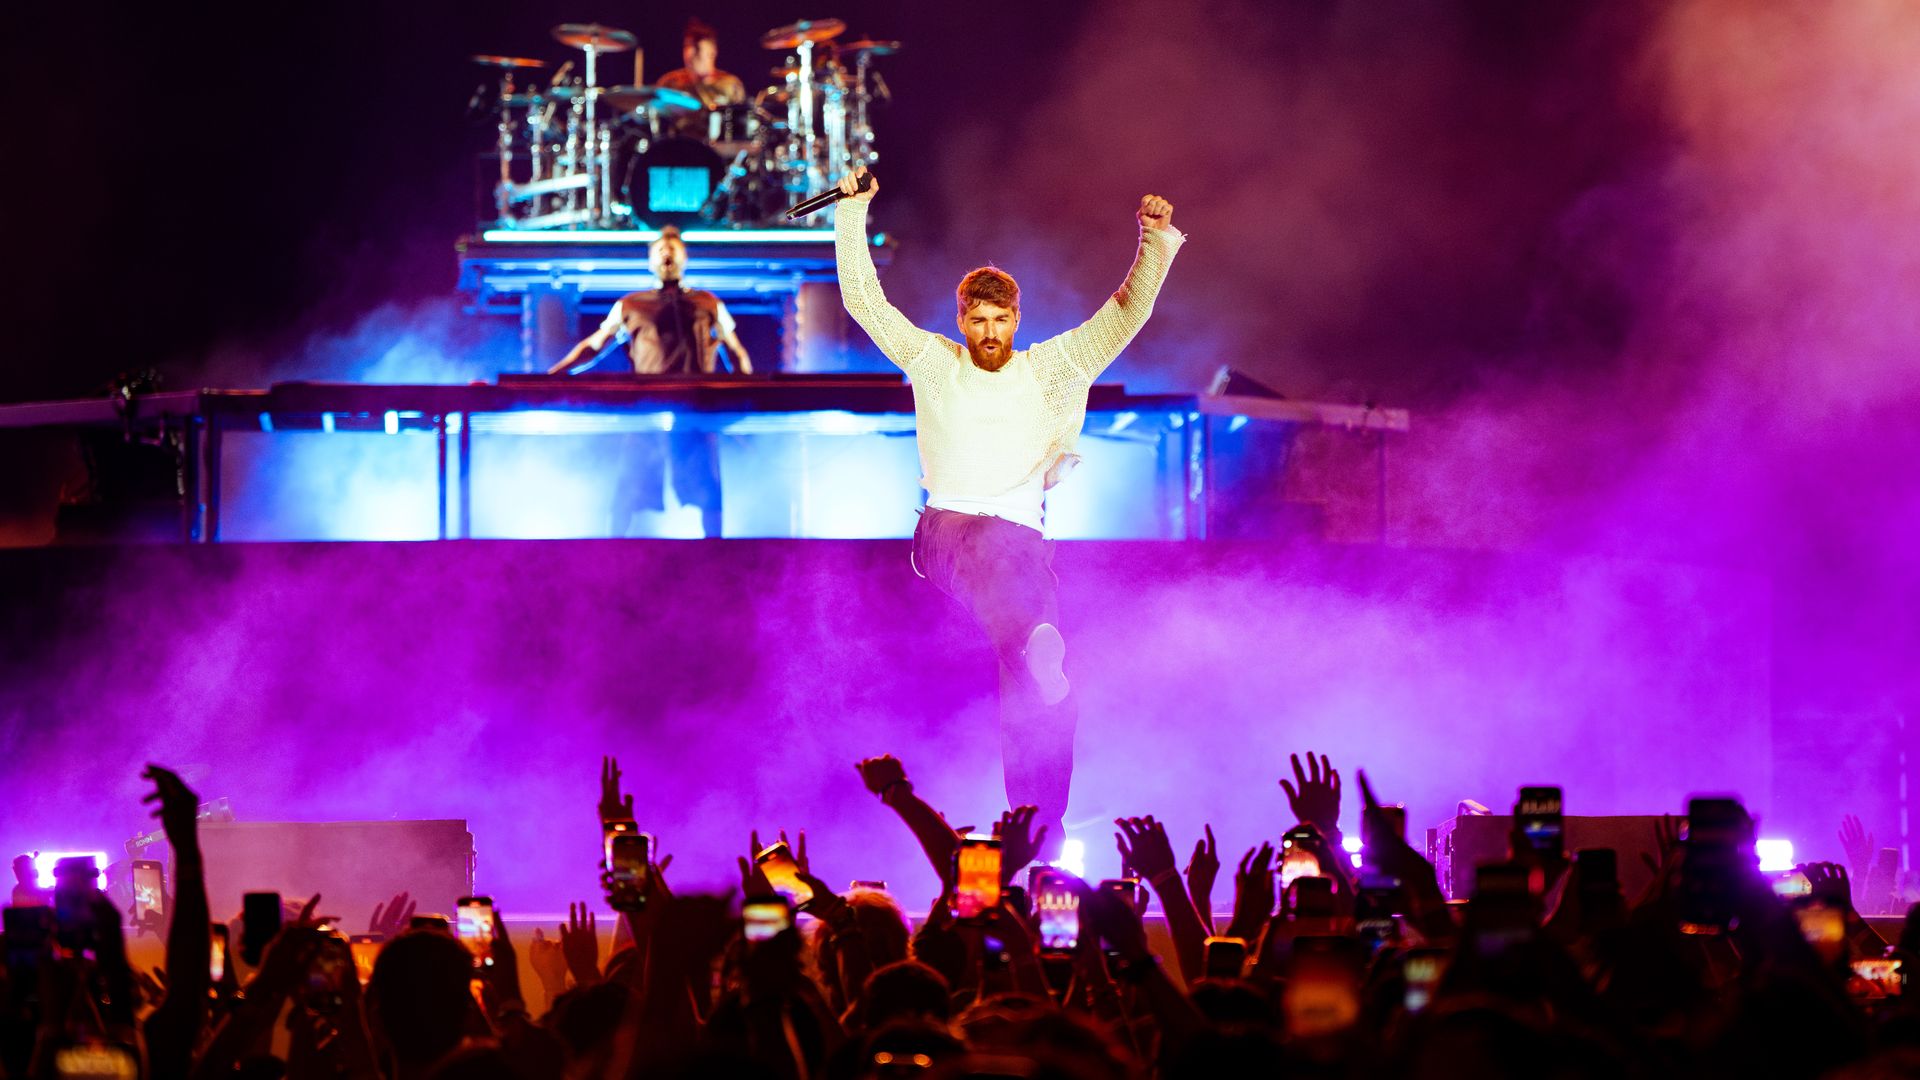 The Chainsmokers perform on stage in LA.